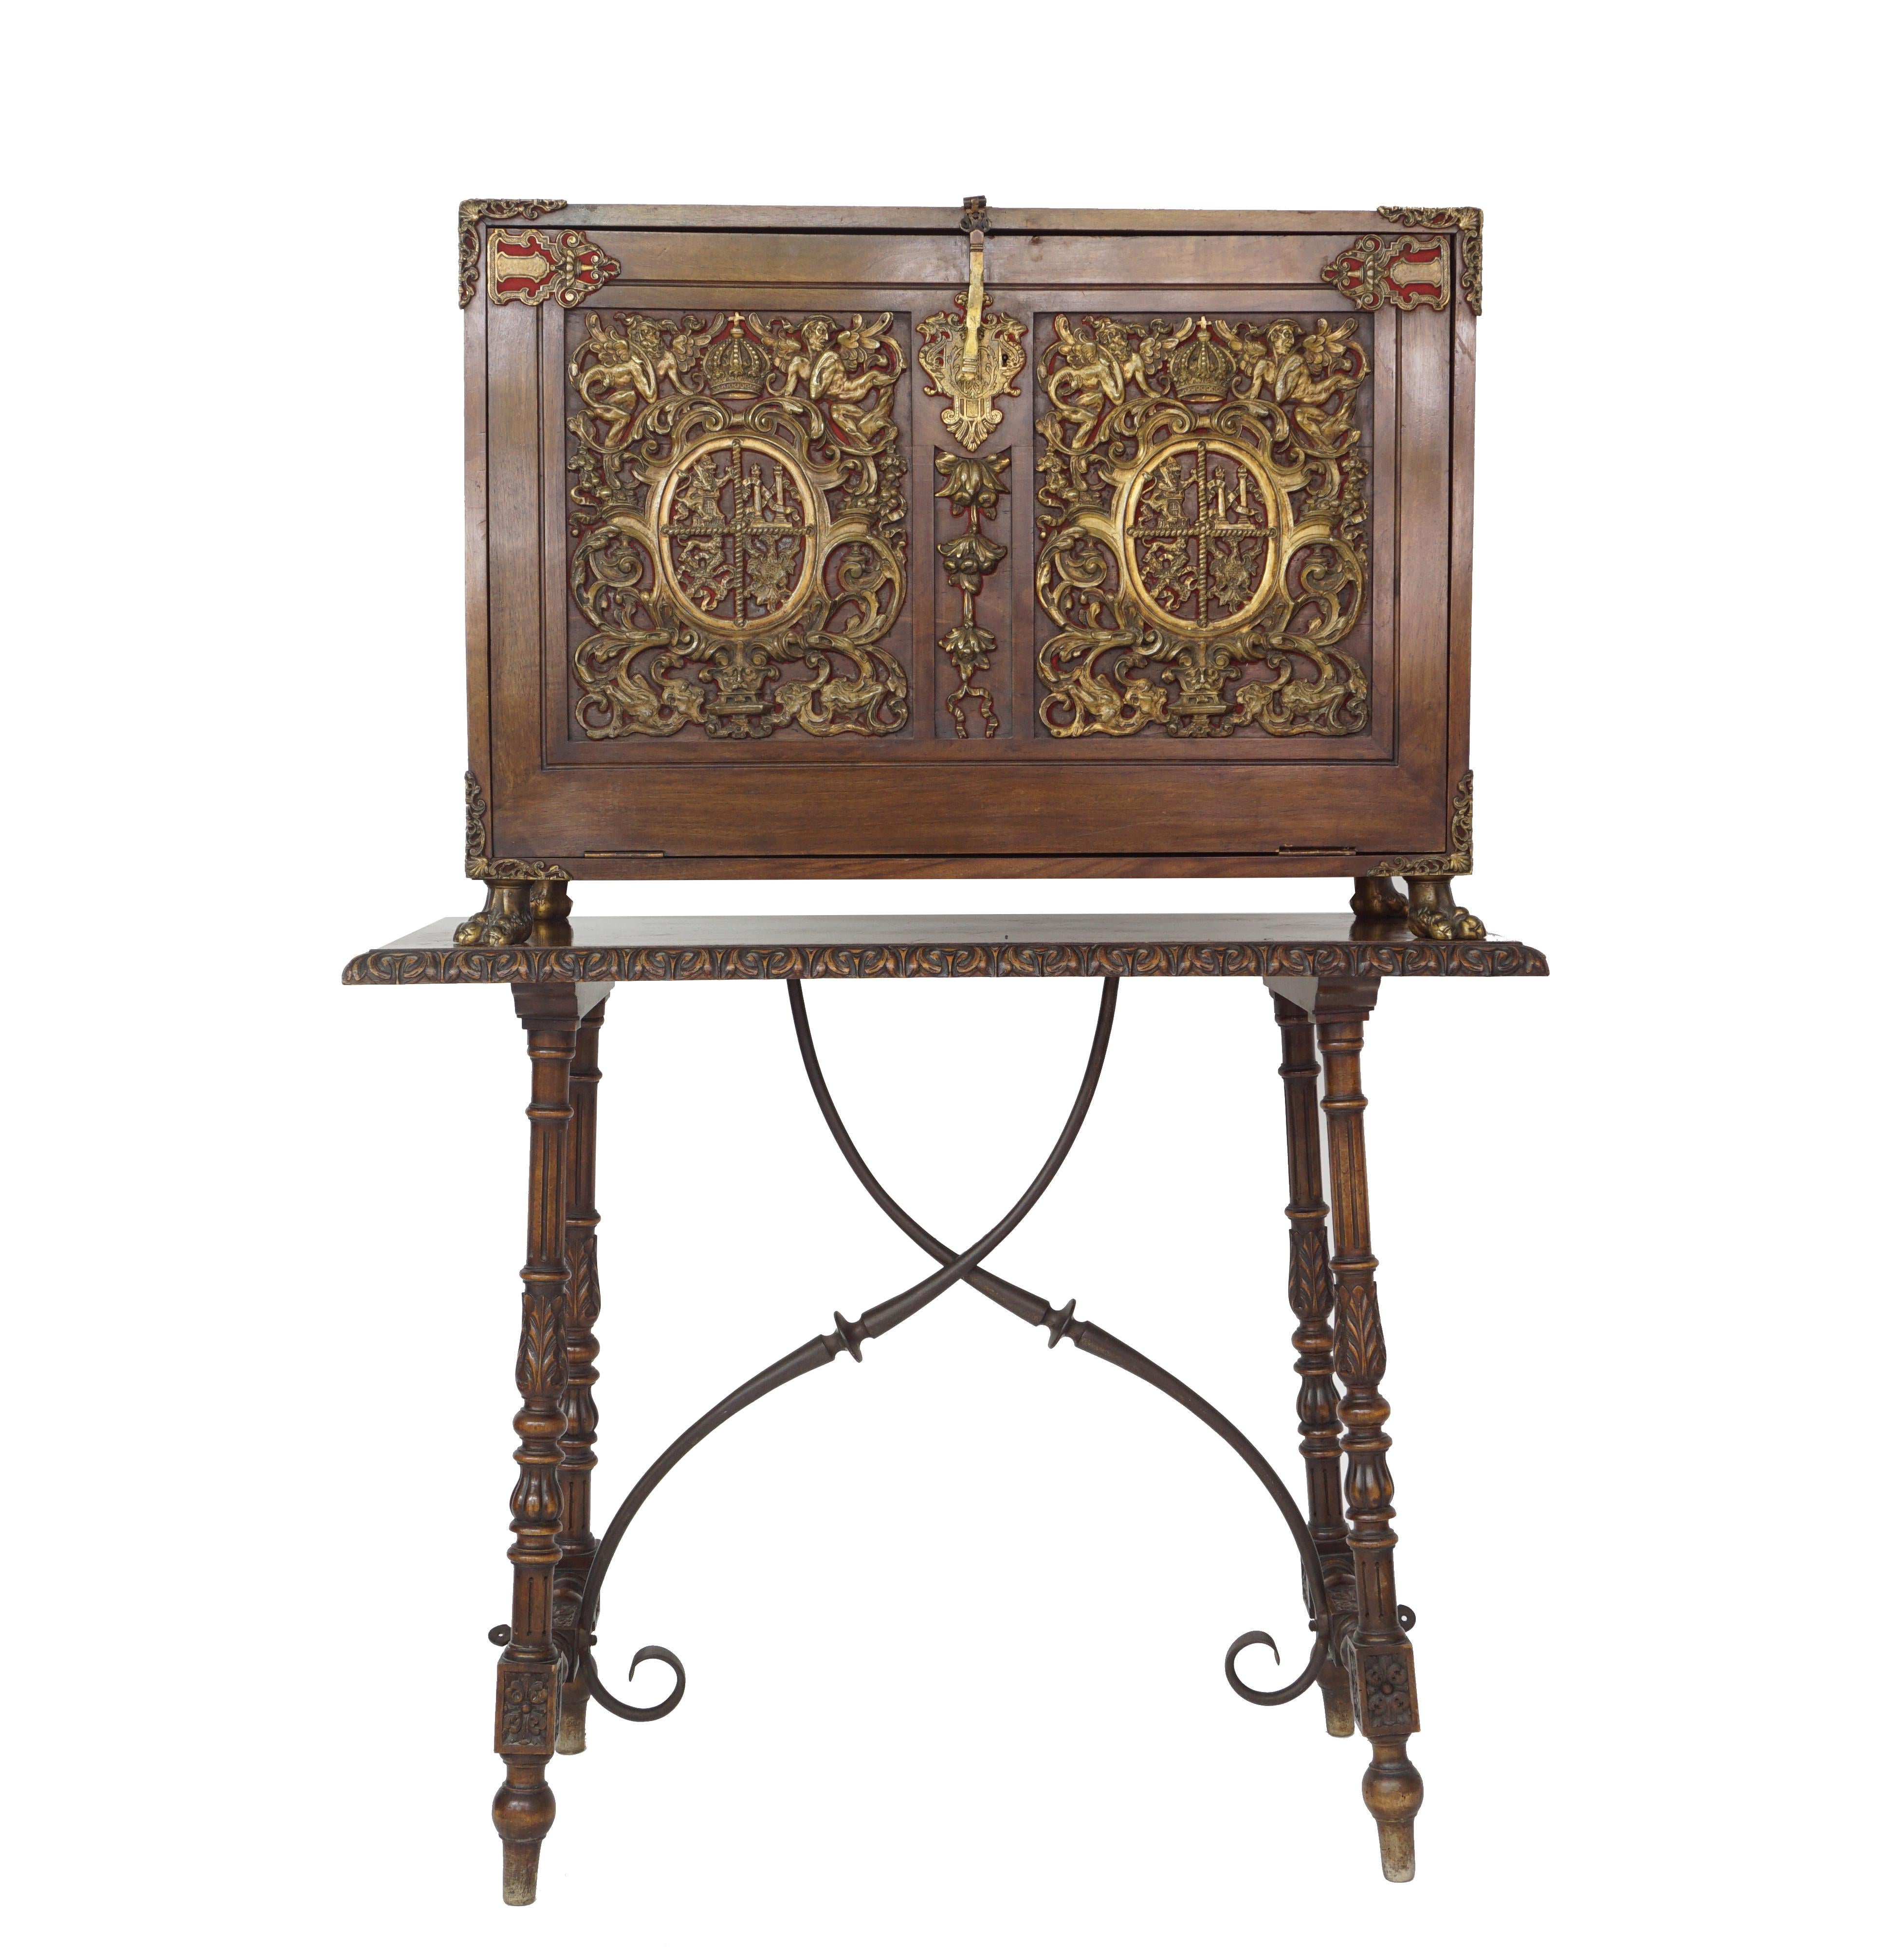 Exceptional 19th century Renaissance Style Vargueno on stand.
Of classical design this papelero style vargueno, serves well as a book case, the front cover lid depicts a pair of spectacular heraldic seals in cast bronze.
Follows the line of